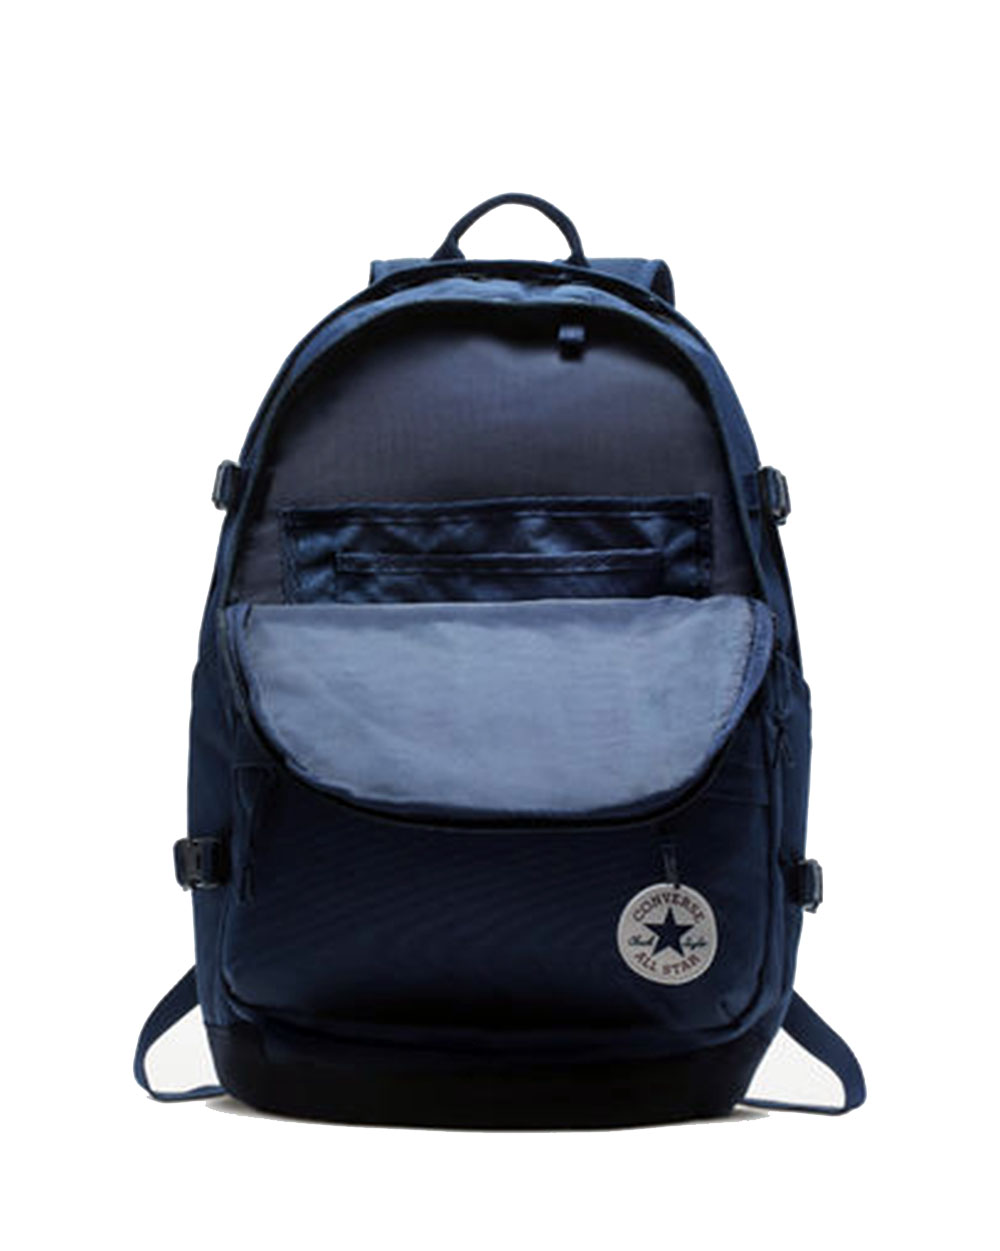 converse straight edge backpack